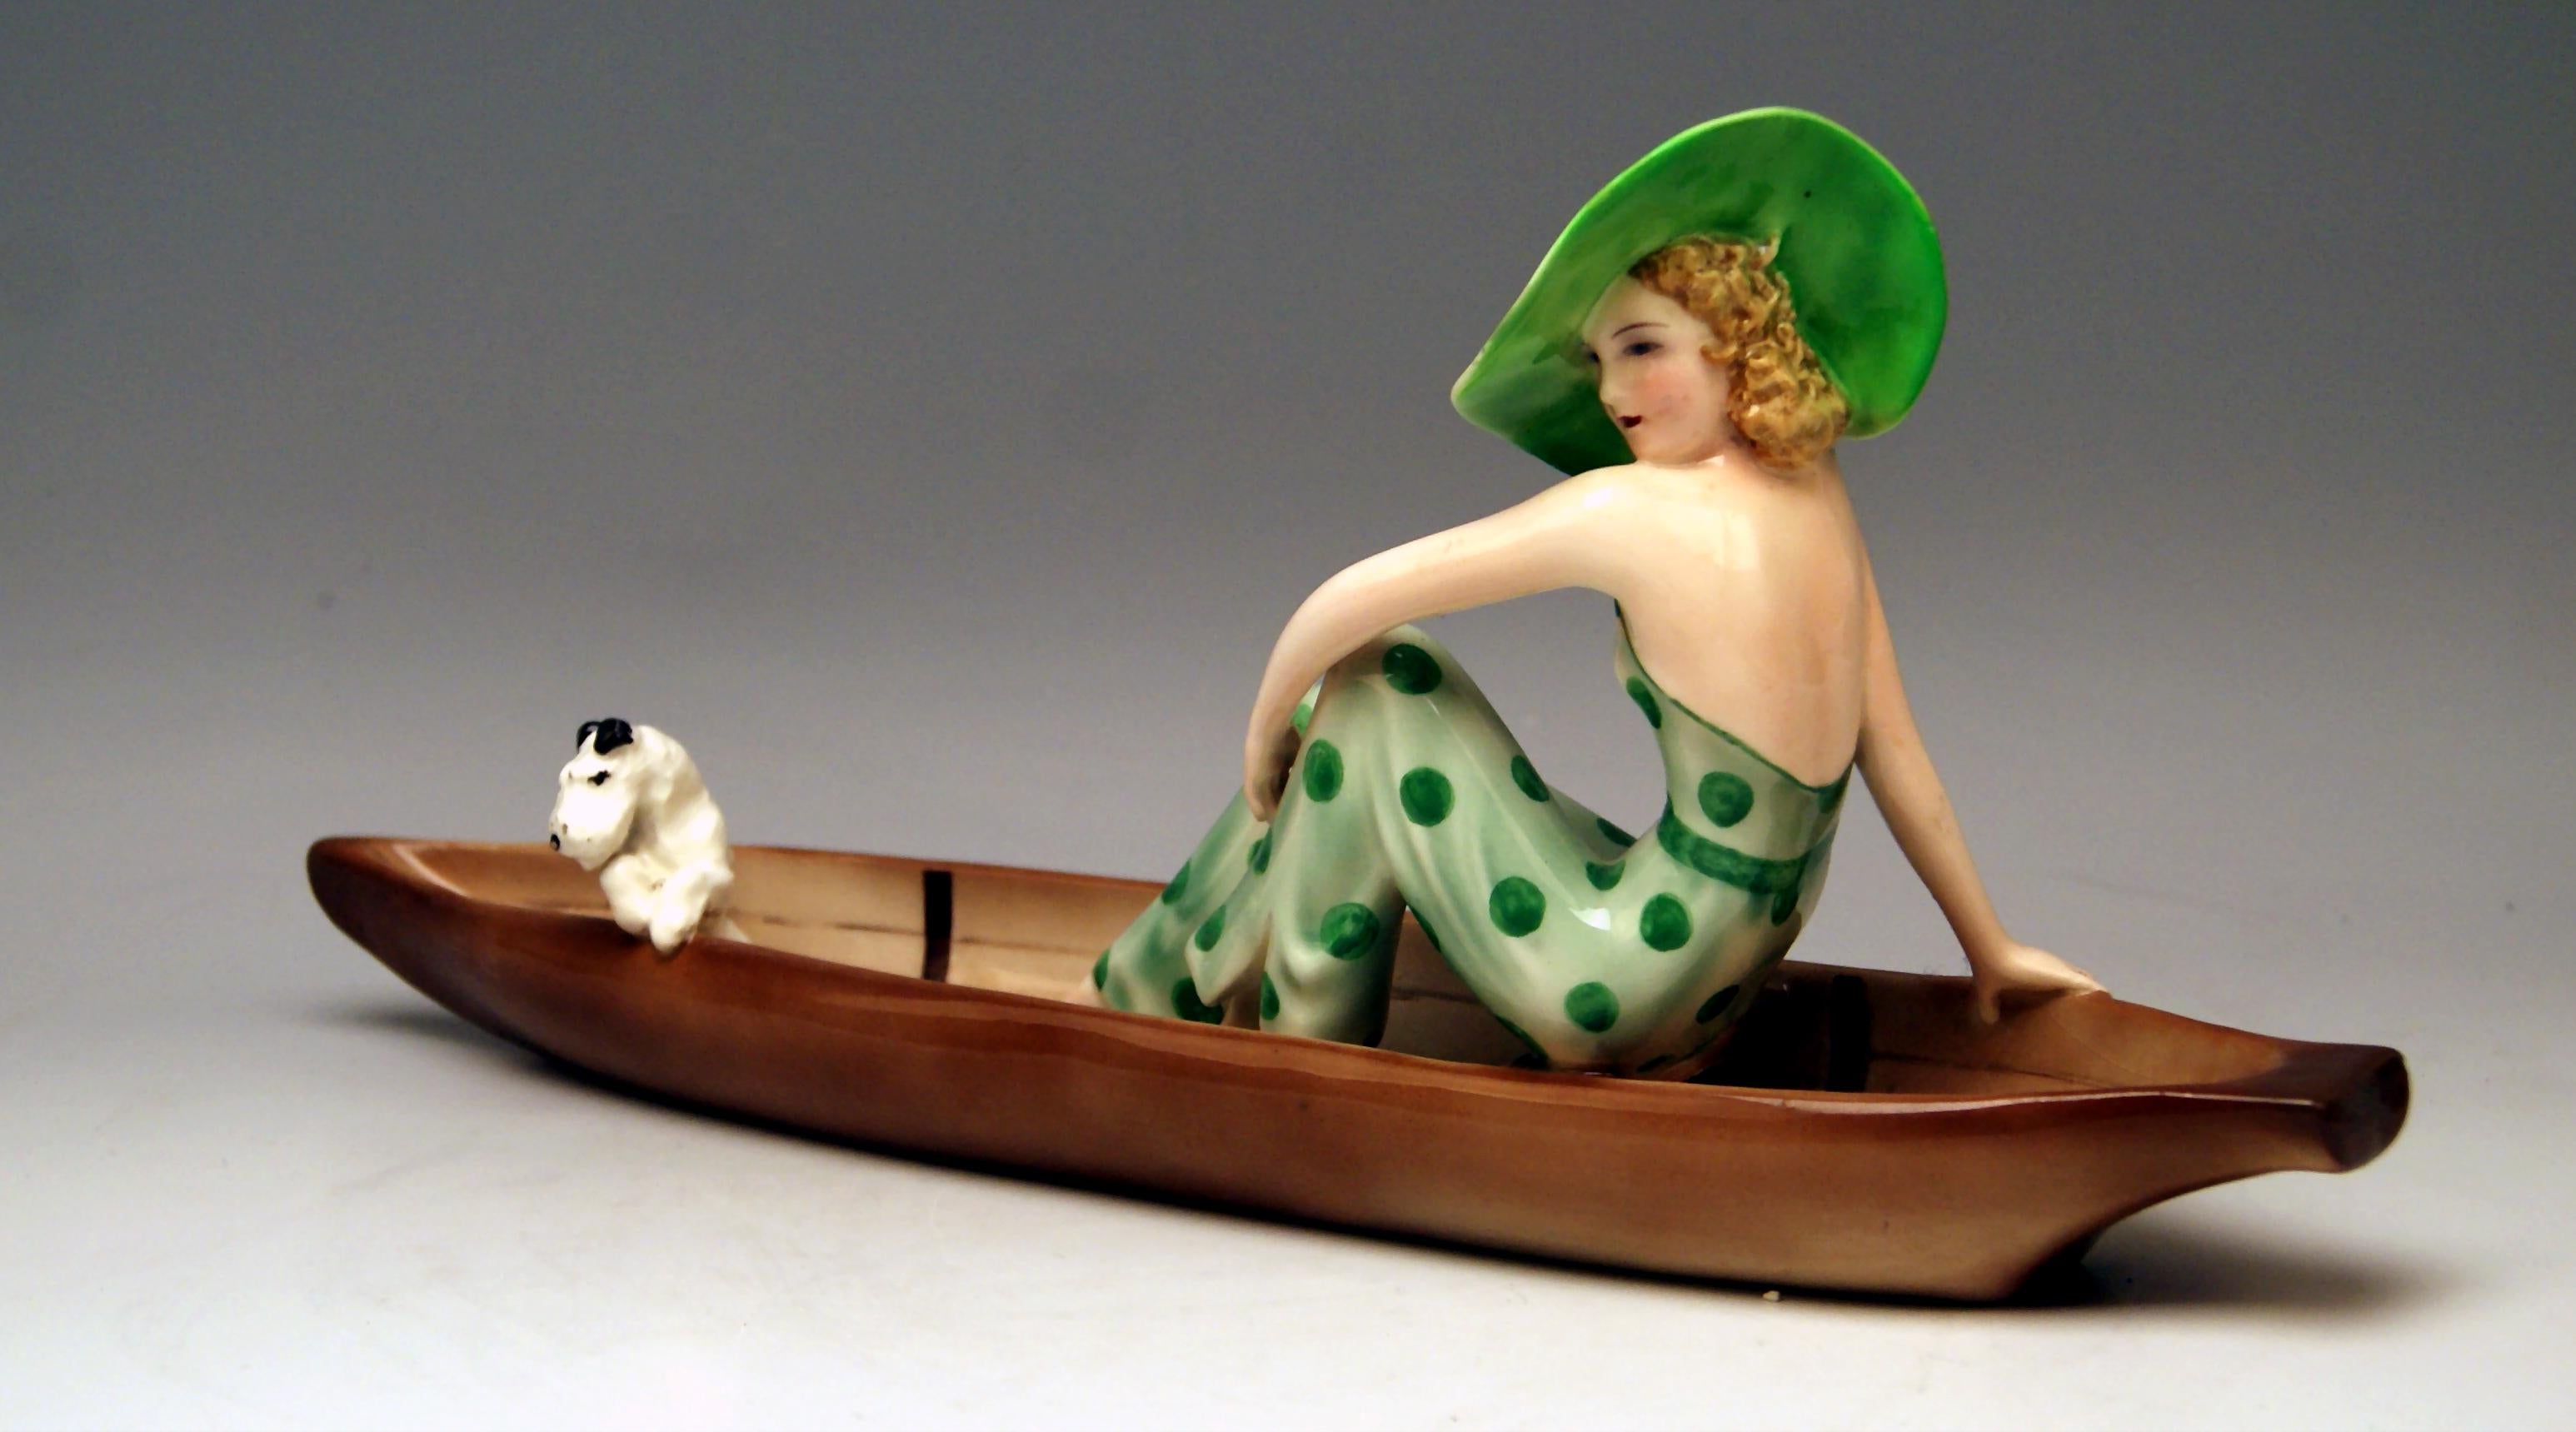 Goldscheider Vienna Lady in Canoe, with Fox Terrier.
Model created 1935 by Stefan (= Stephen) Dakon (1904 - 1992).
Made circa 1936-37. 
model number 7256 / 162 / 16

Hallmarked:
painter's sign & two signatures 'Dakon' at reverse side of canoe